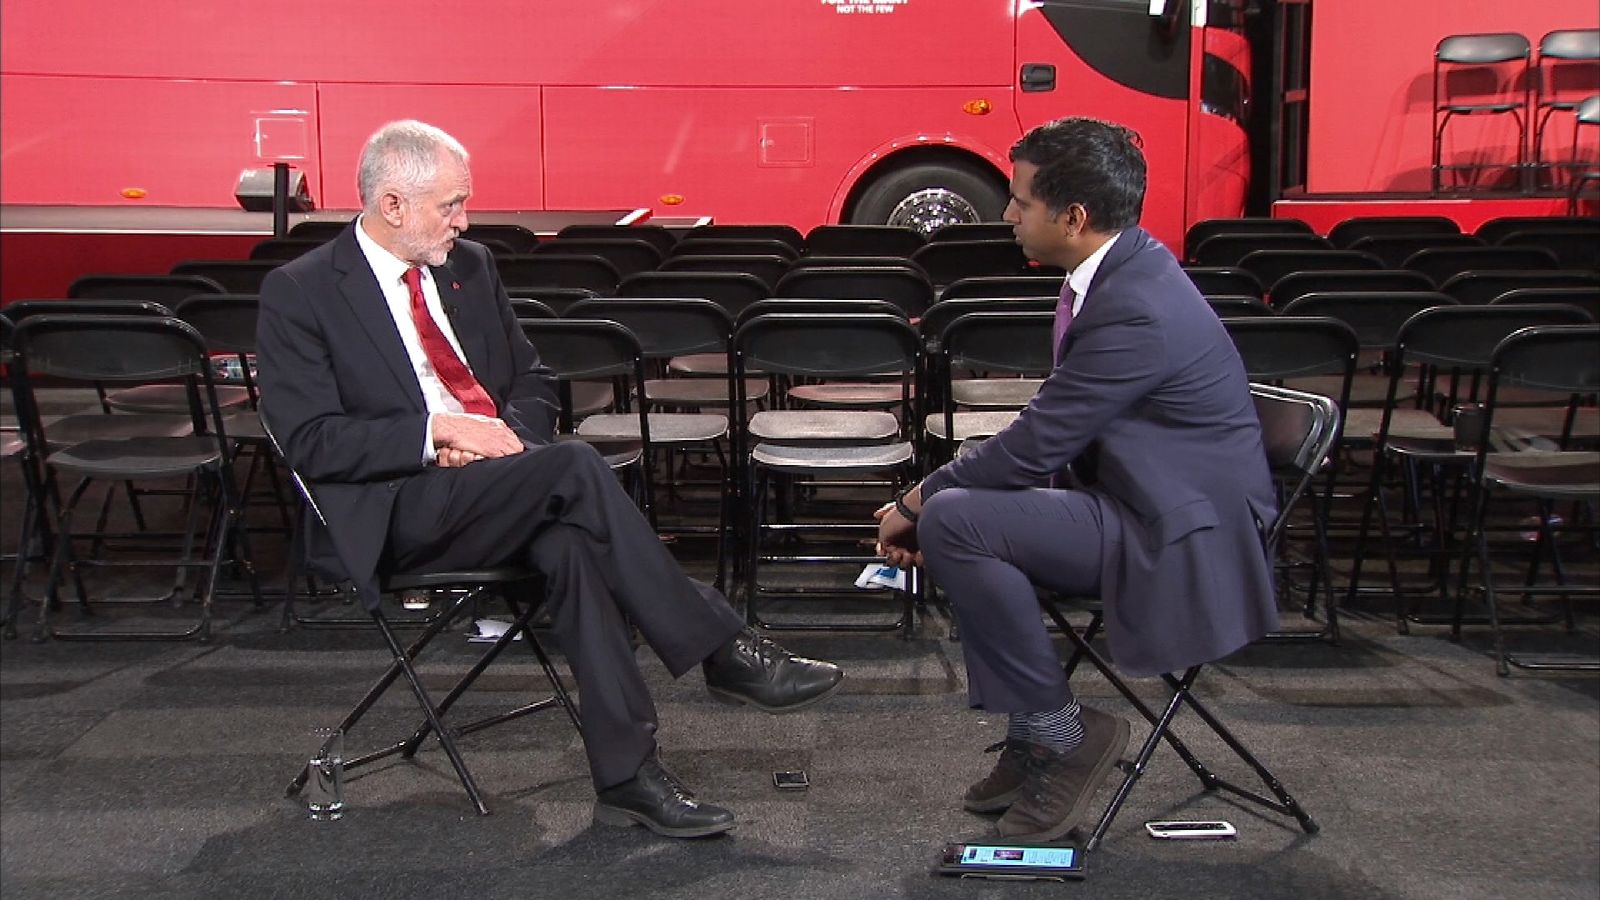 Labour leader Jeremy Corbyn discusses Labour's proposals for tax and Europe